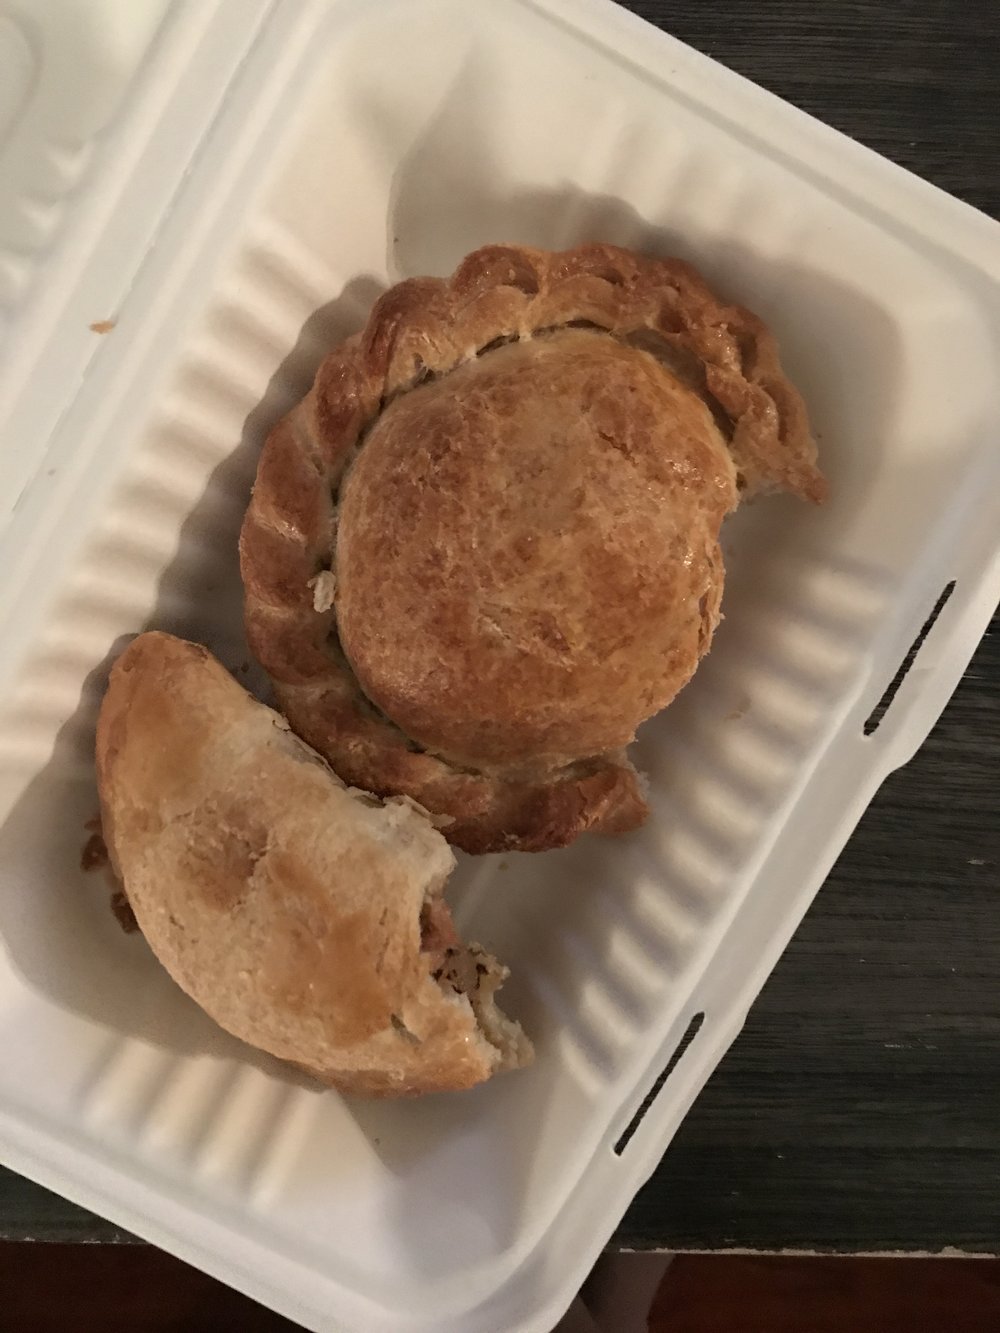 Beef minced pie from Dong Phuong Bakery